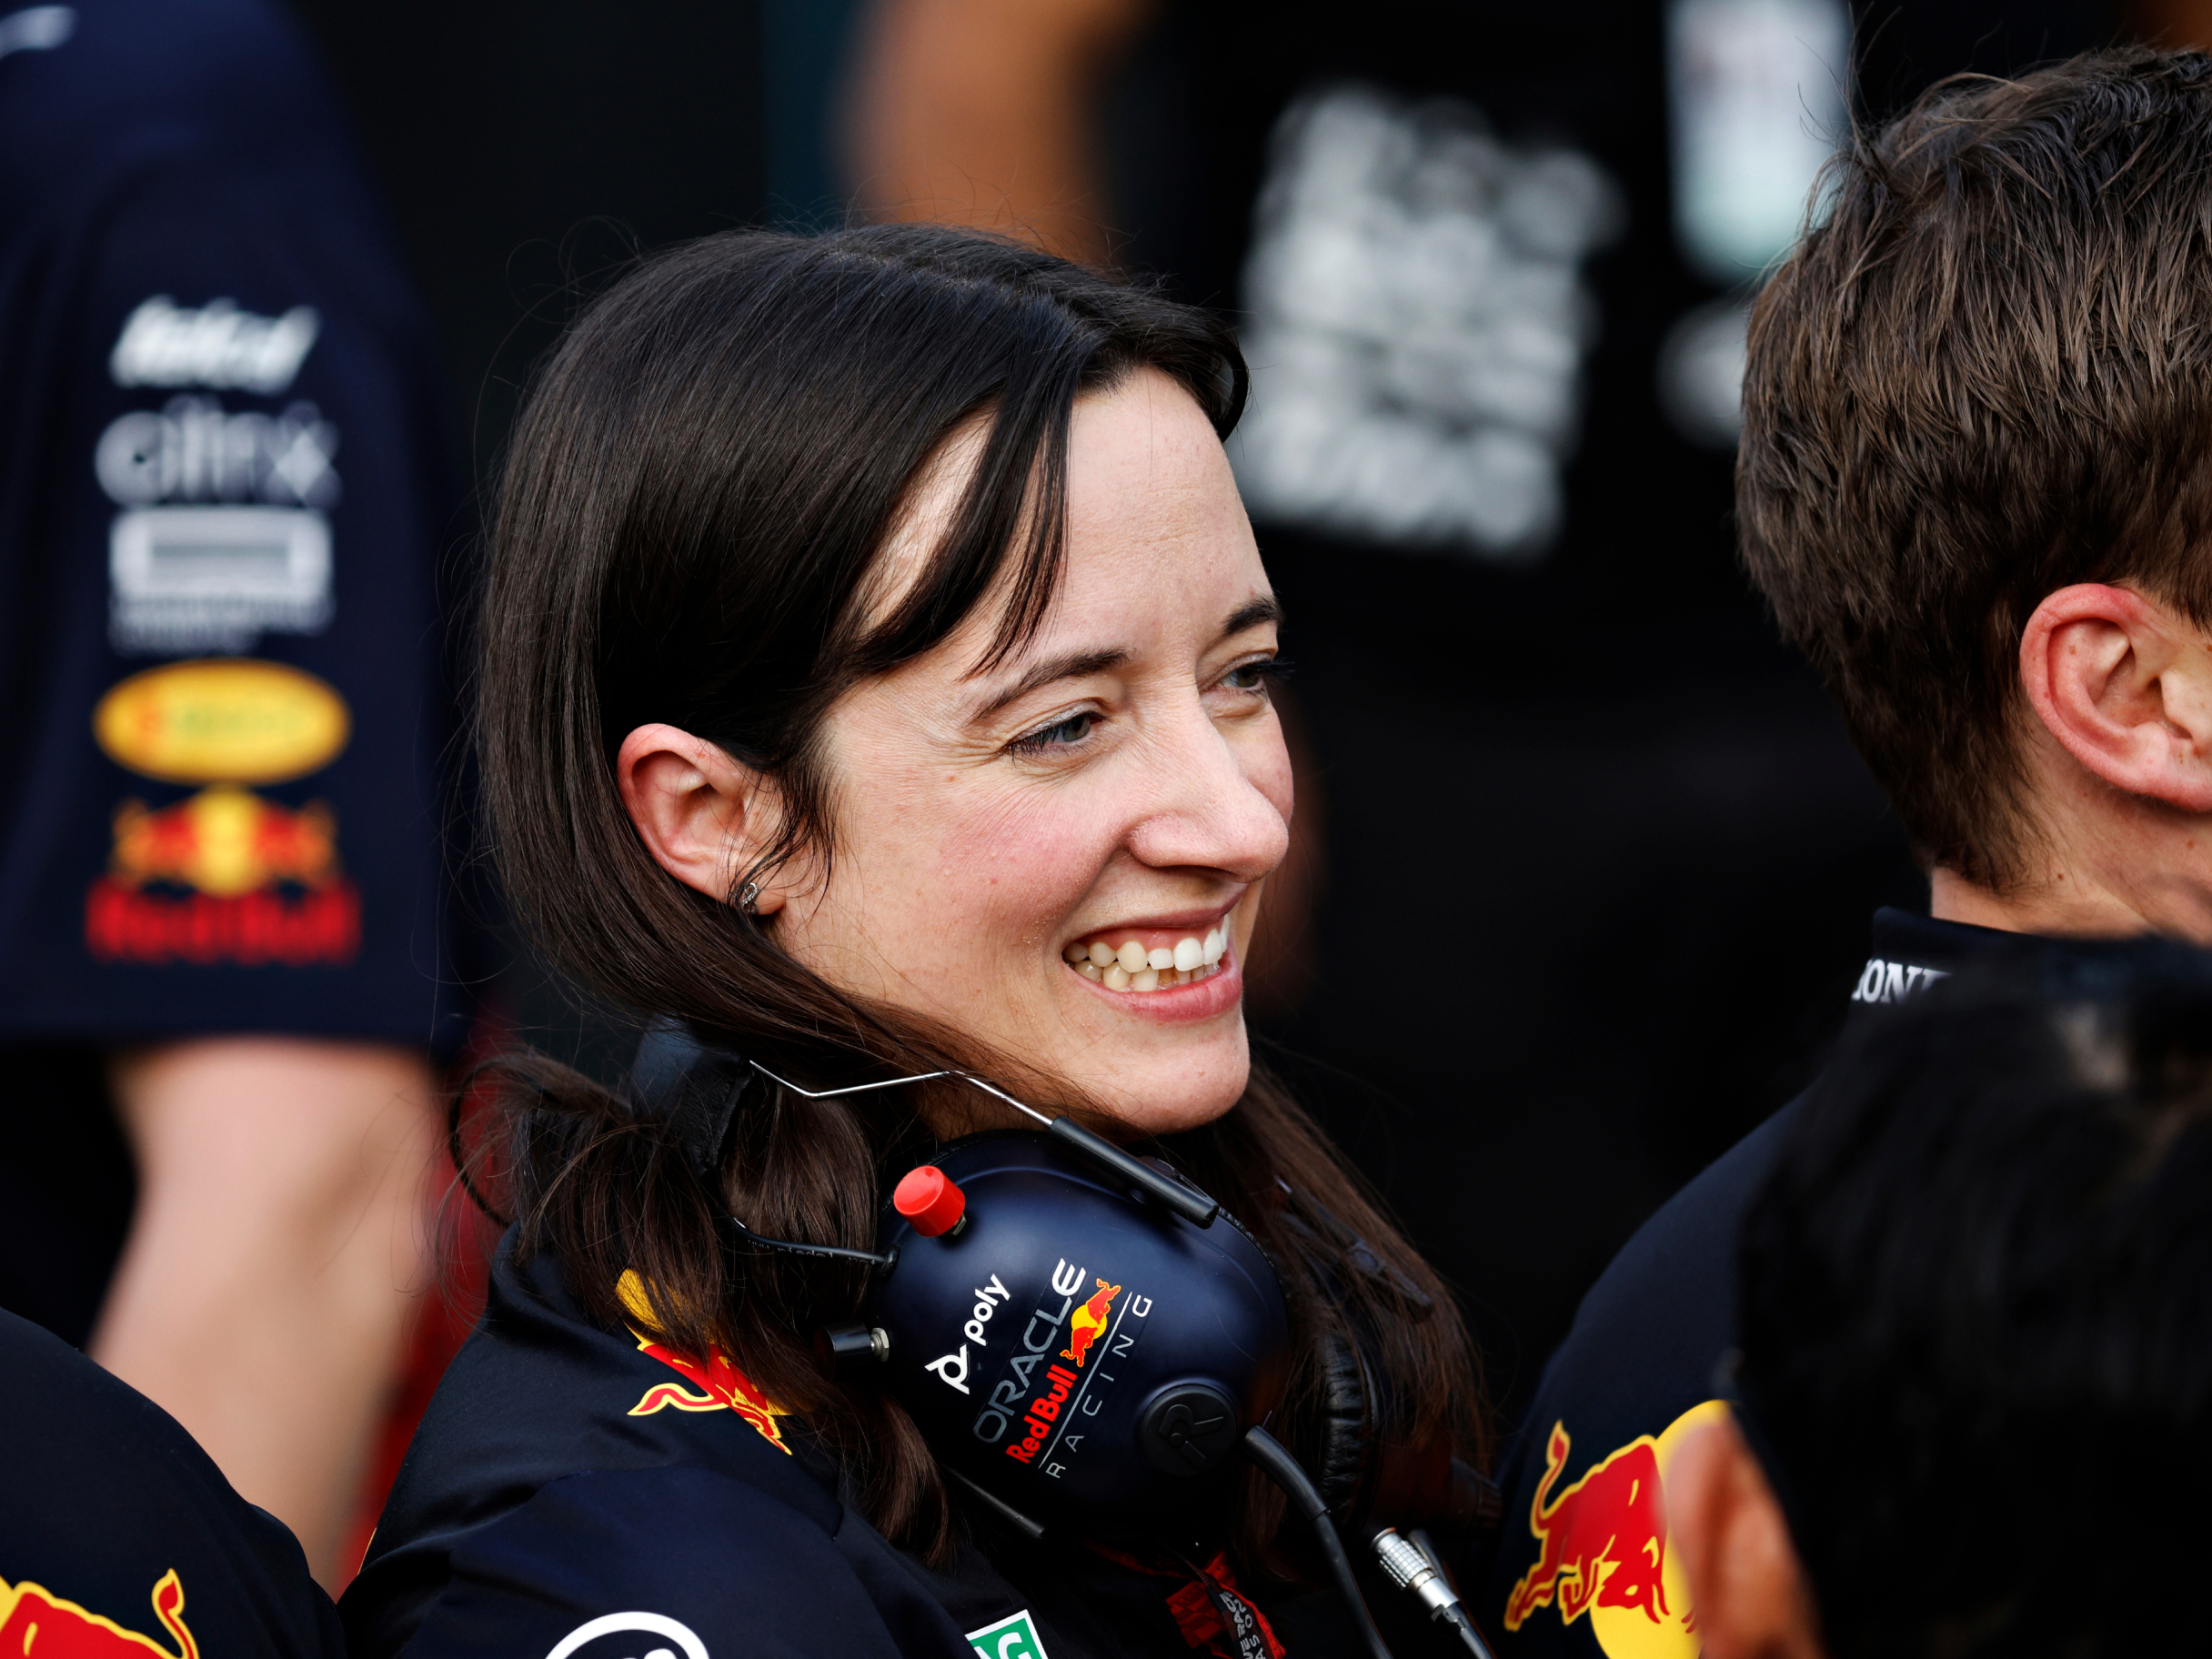 Oracle Red Bull Racing and Rokt launch new video series highlighting women in sports and engineering